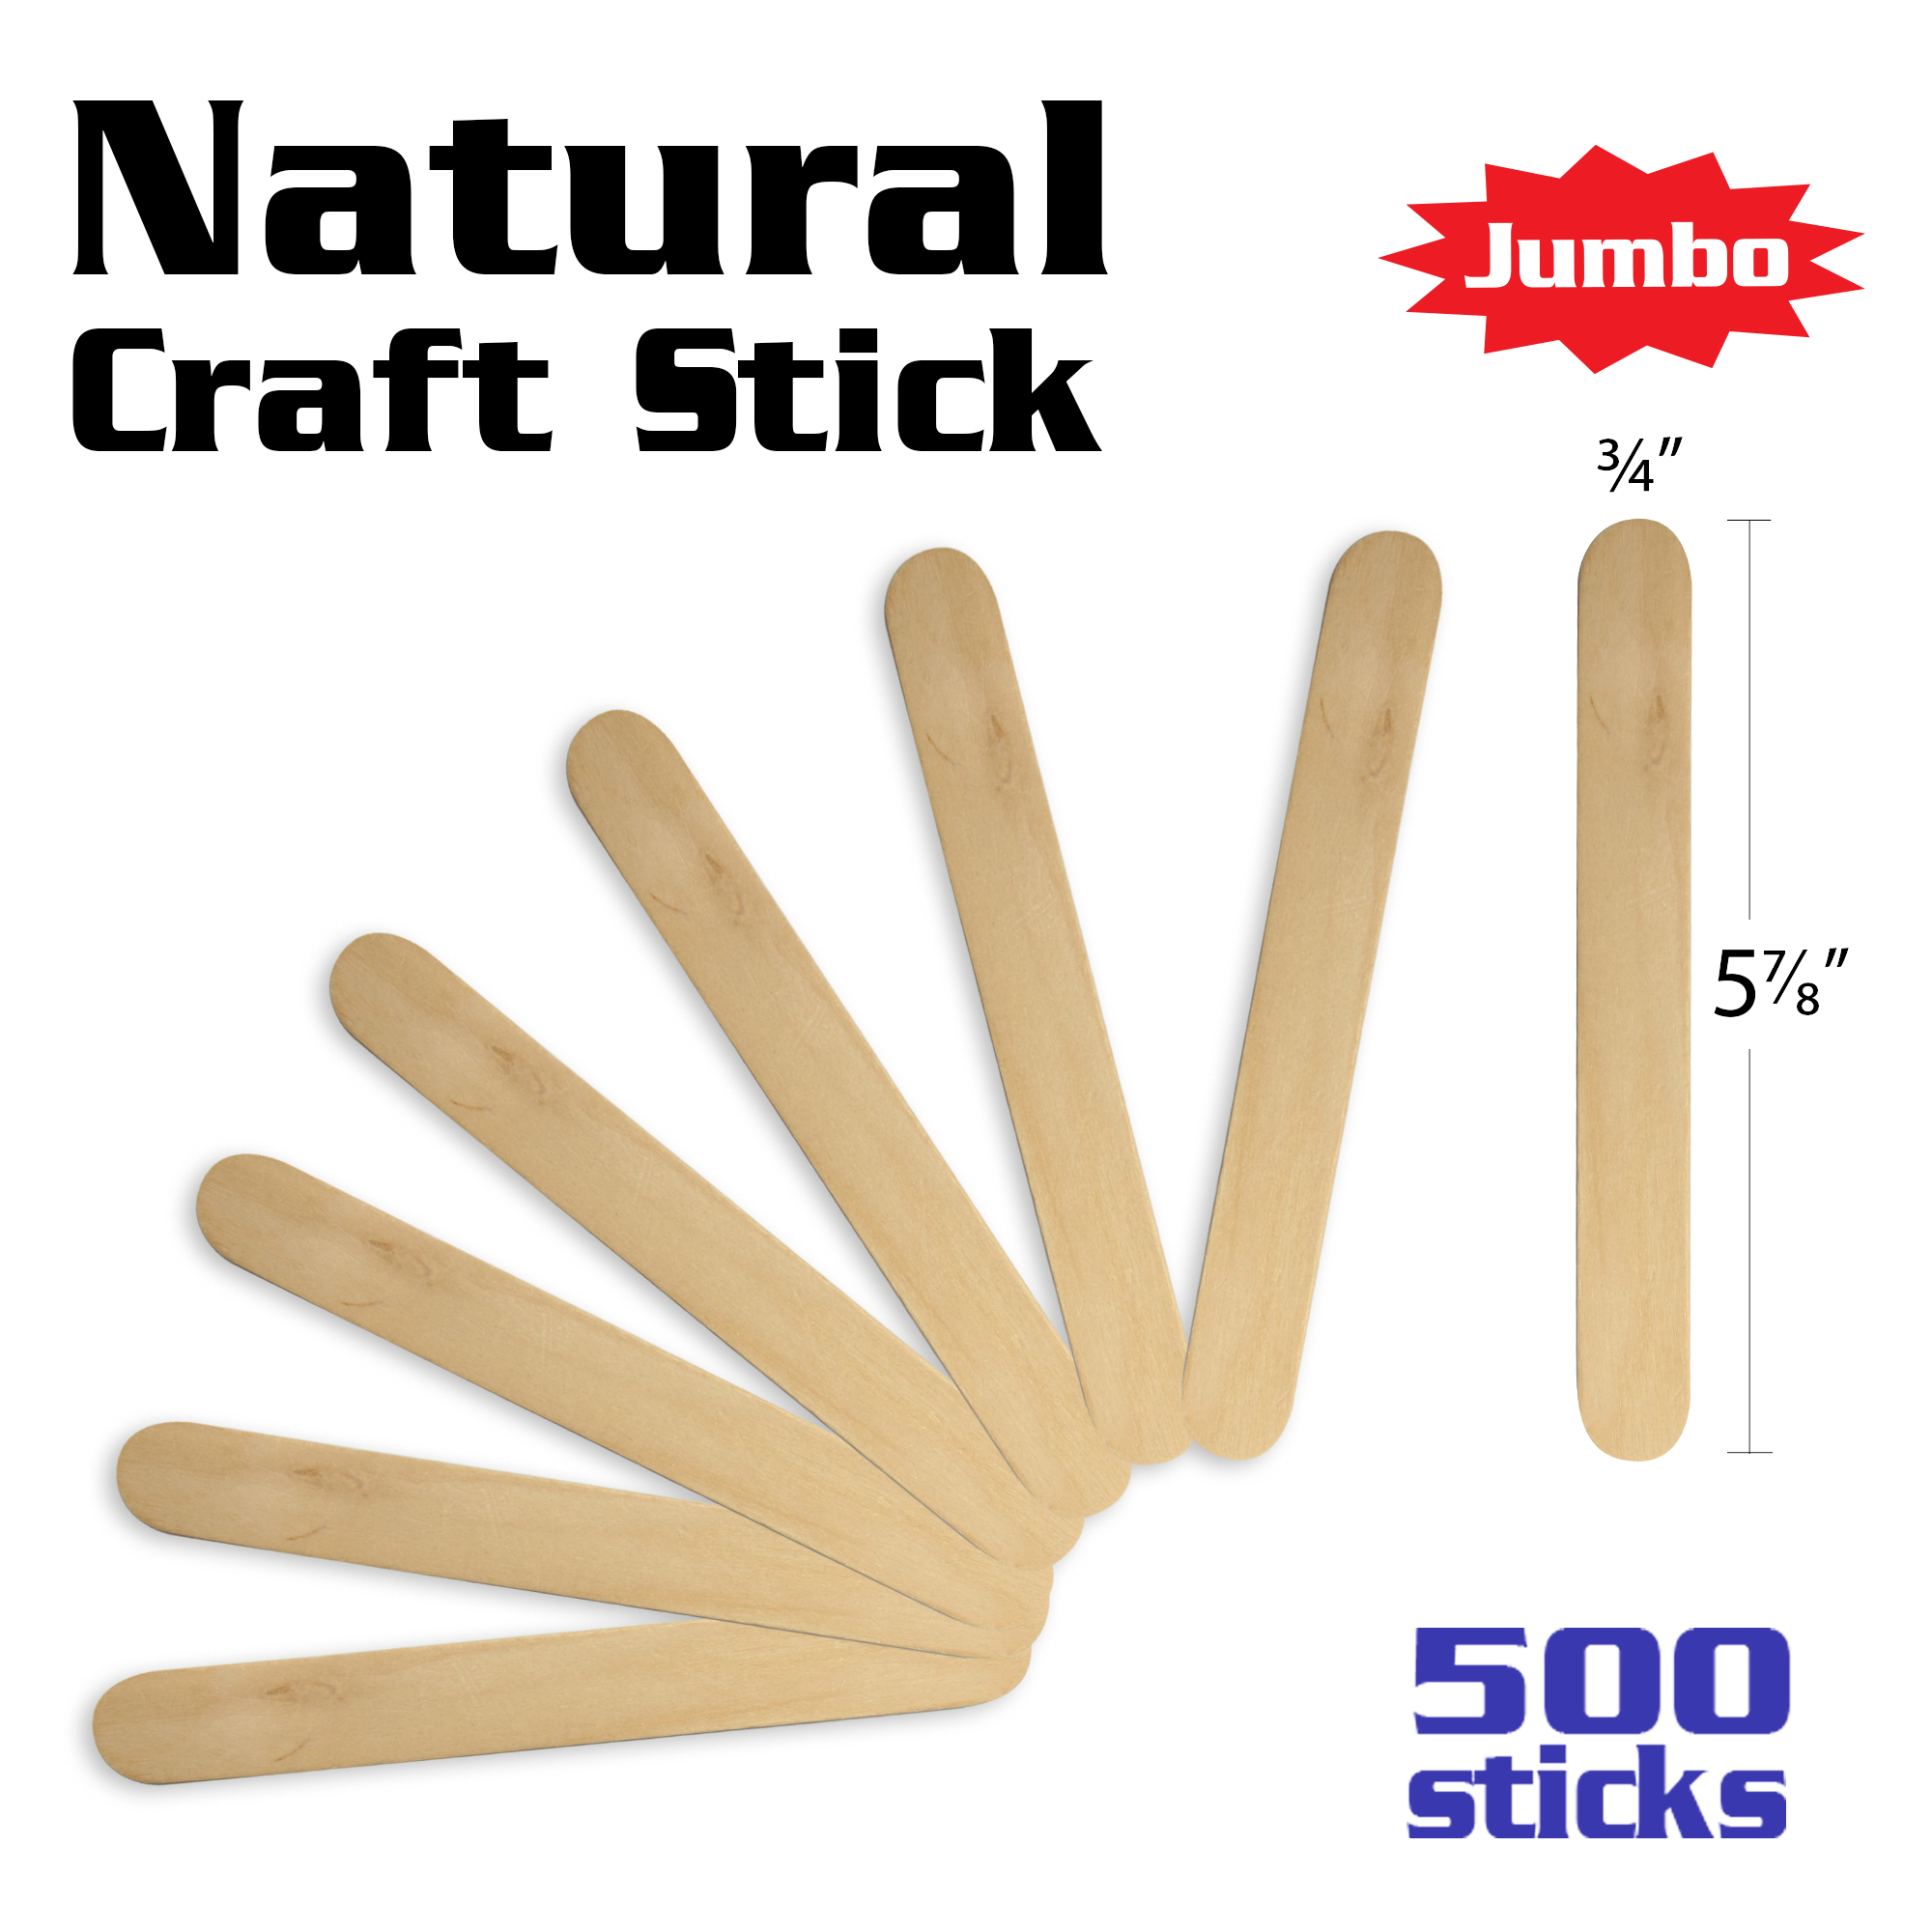 Knowledge Tree  Pacon Corporation D.b.a. Mini Craft Sticks, Natural,  2-9/16, 500 Pieces